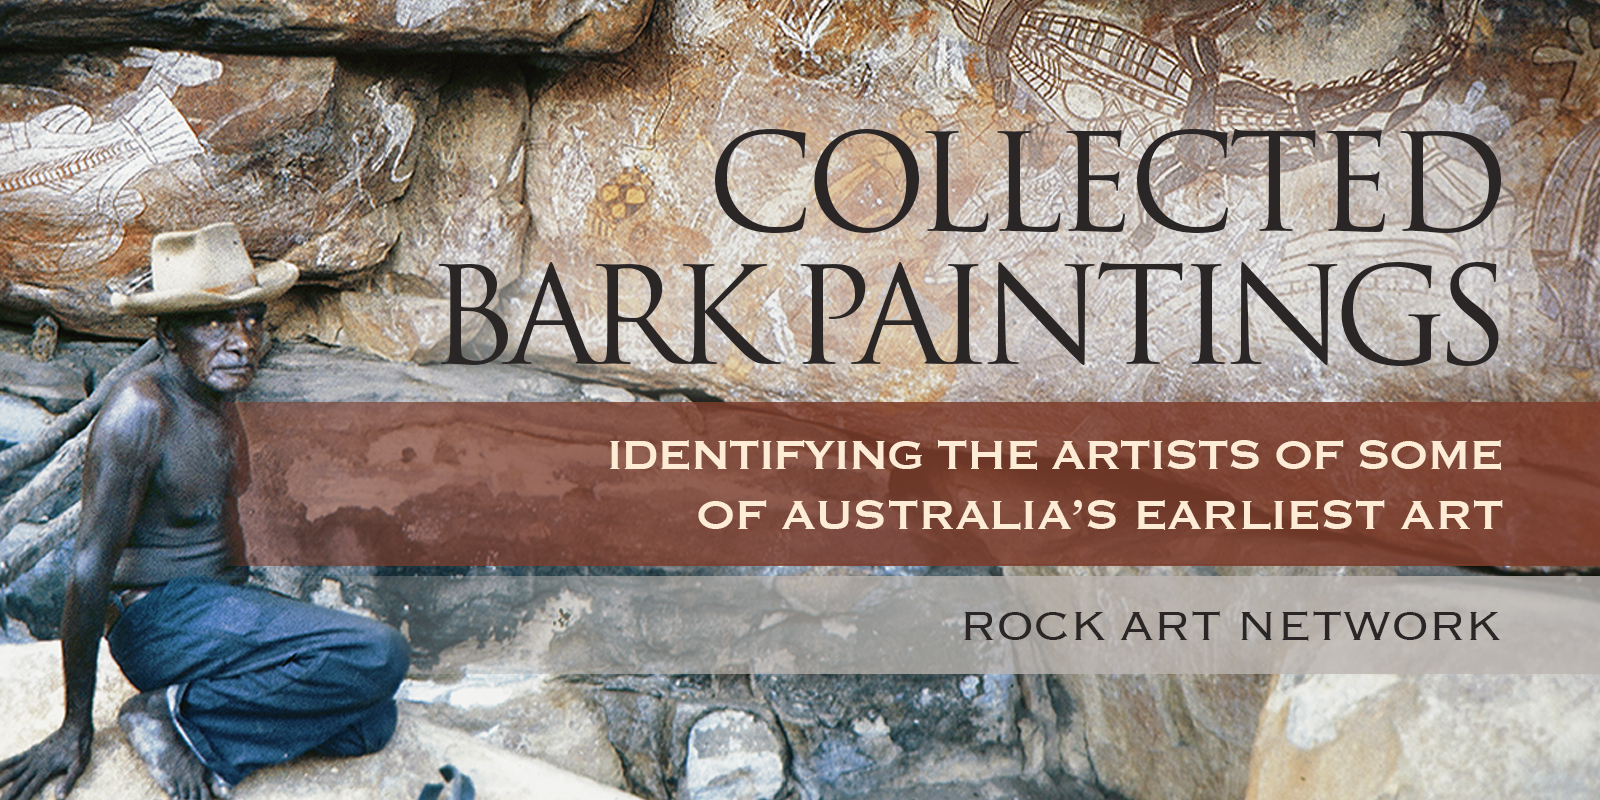 Identifying the artists of some of Australia's earliest art